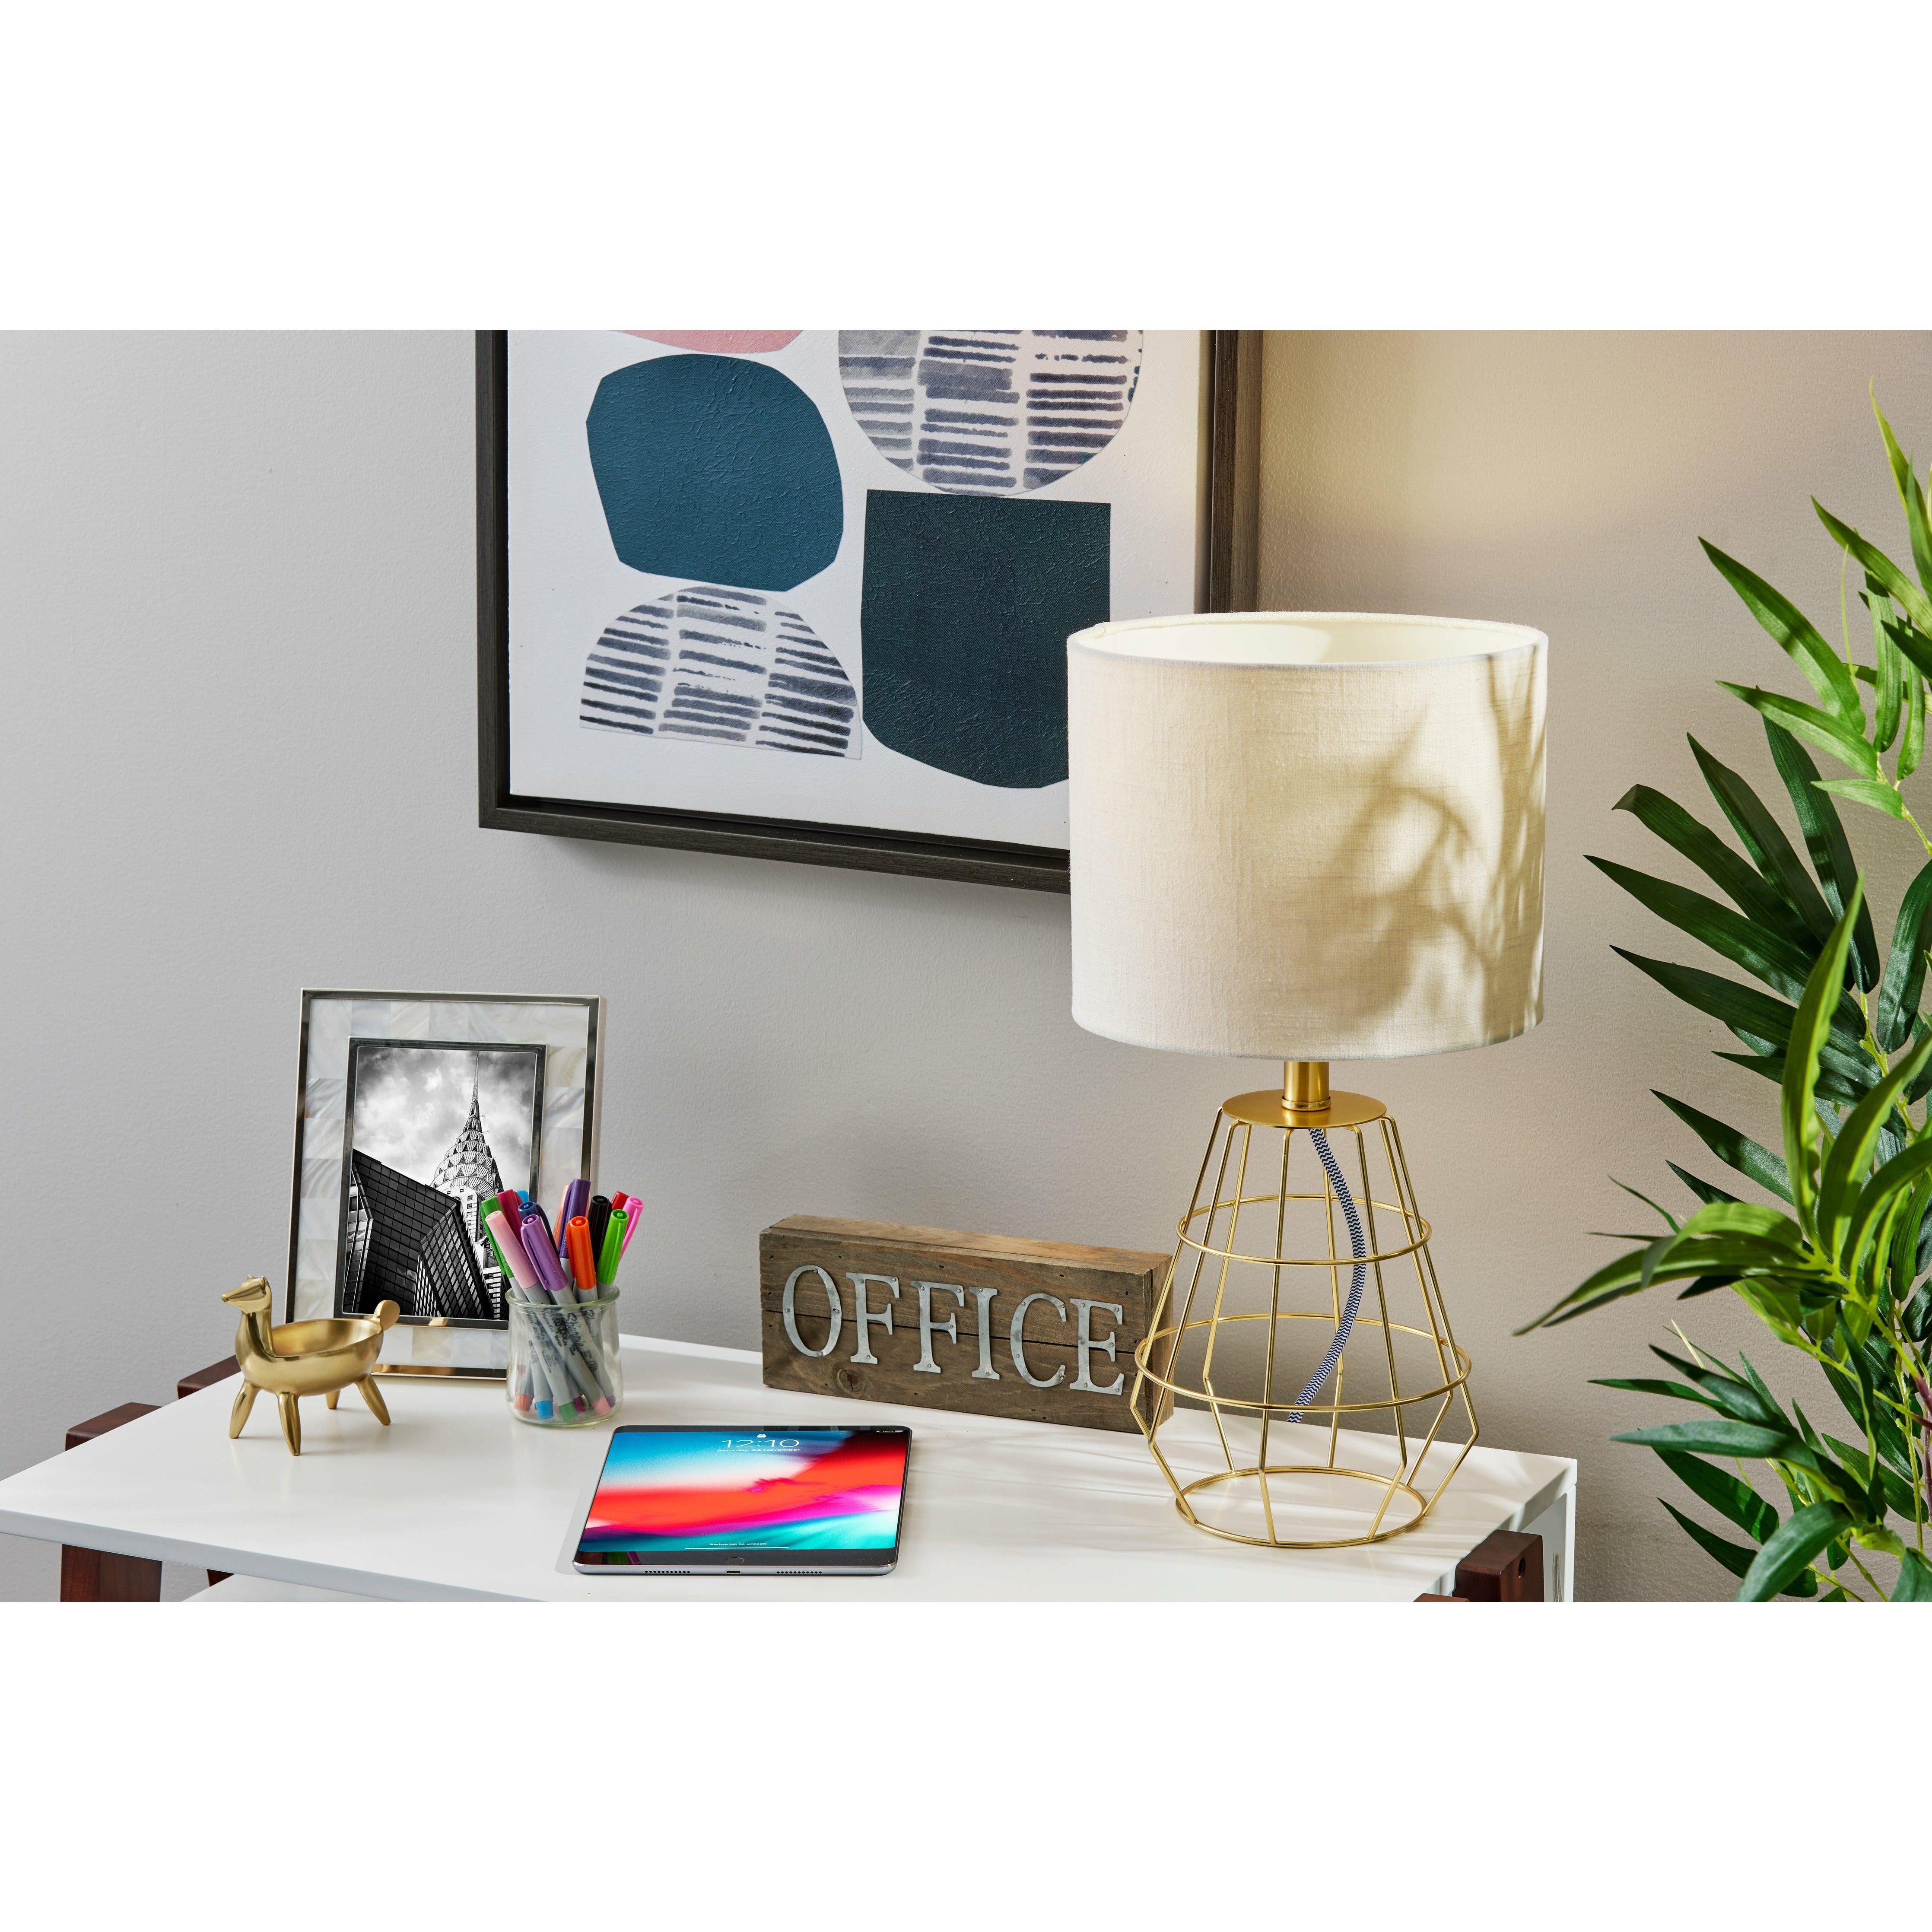 Adesso - Victor Table Lamp - Lights Canada